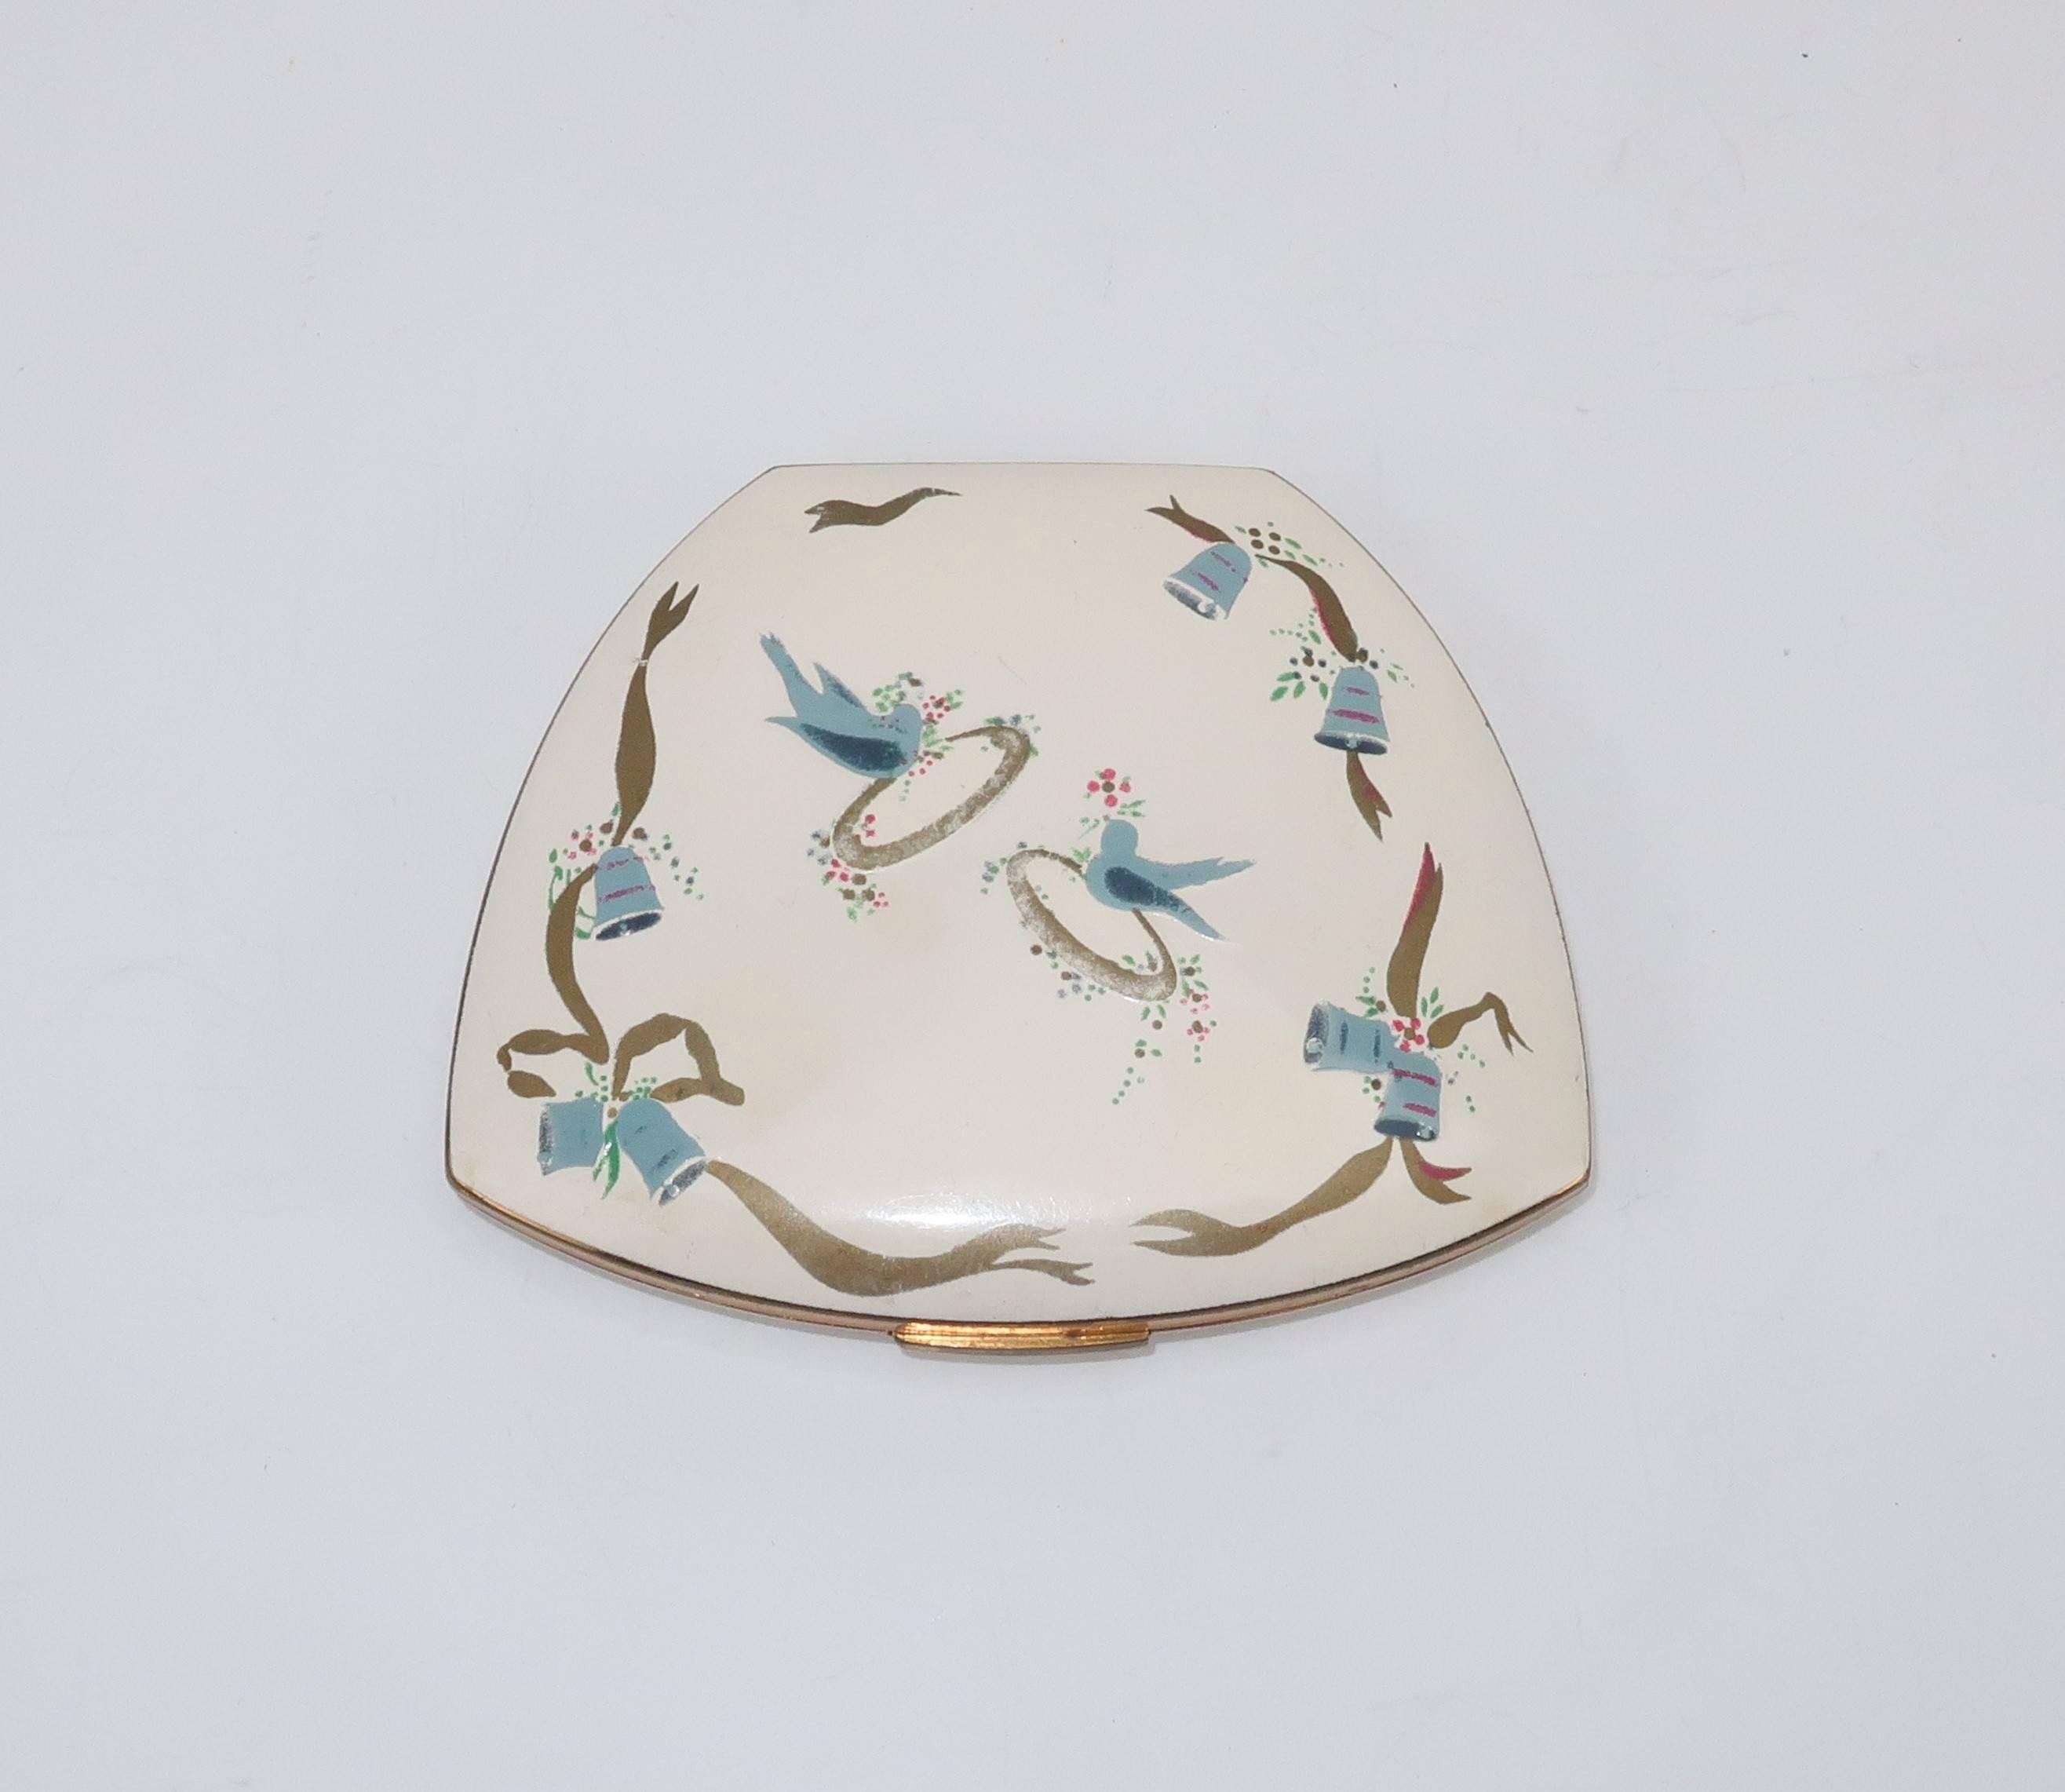 ‘Something old, something new, something borrowed and something blue’ ... add ‘something charming’ and all your bases will be covered with this 1940’s Elgin American mirrored powder compact.  The clam shell shaped gold tone case is whimsically